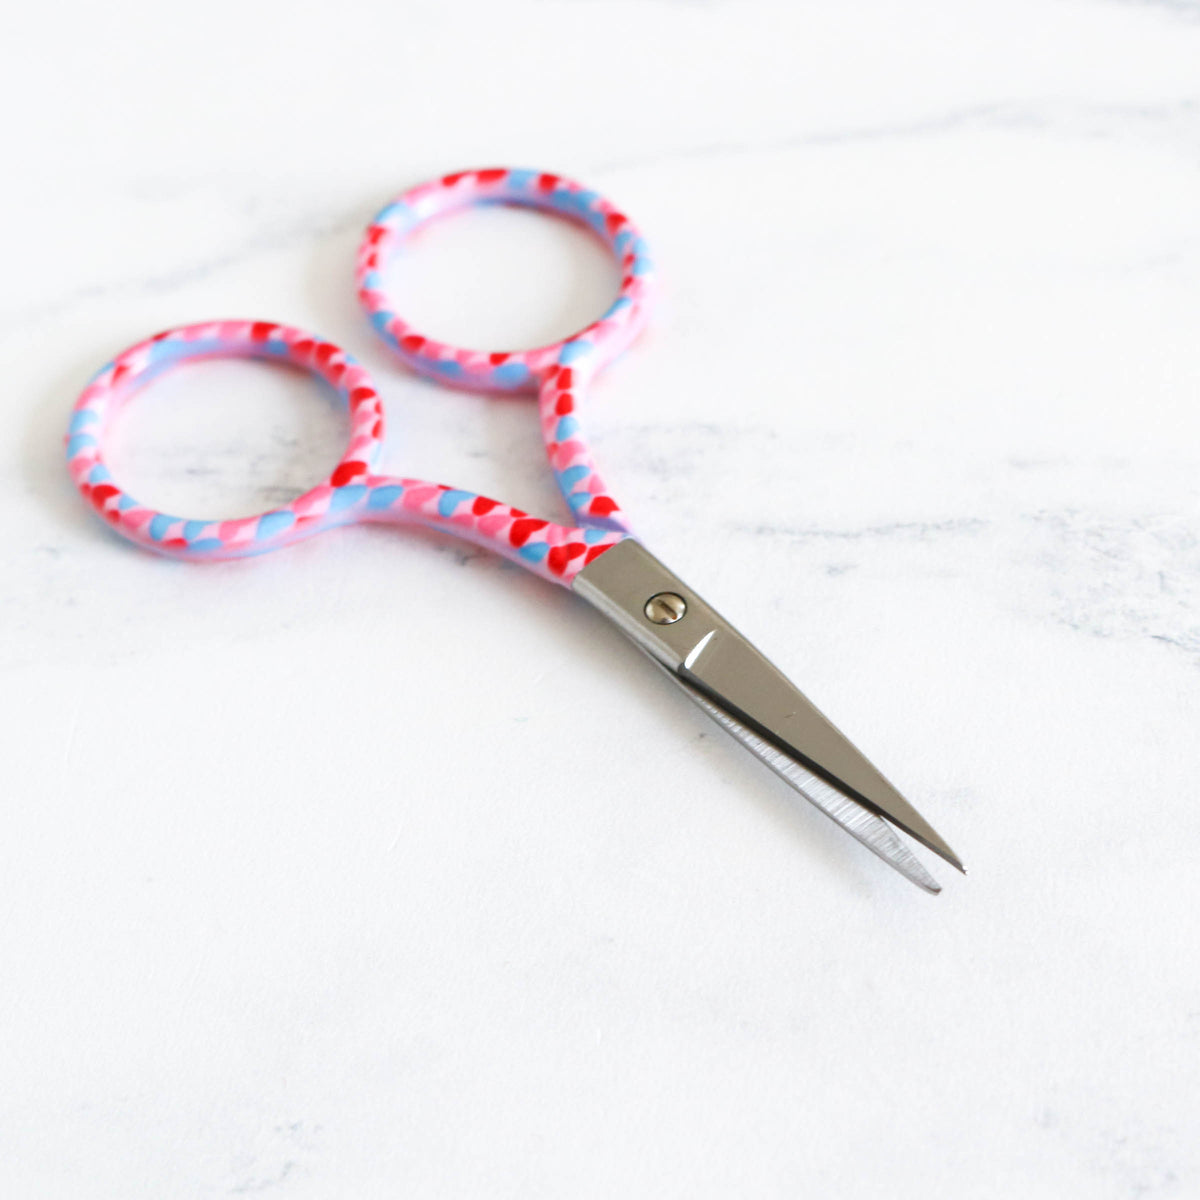 Patterned Embroidery Scissors - Red and Pink Hearts